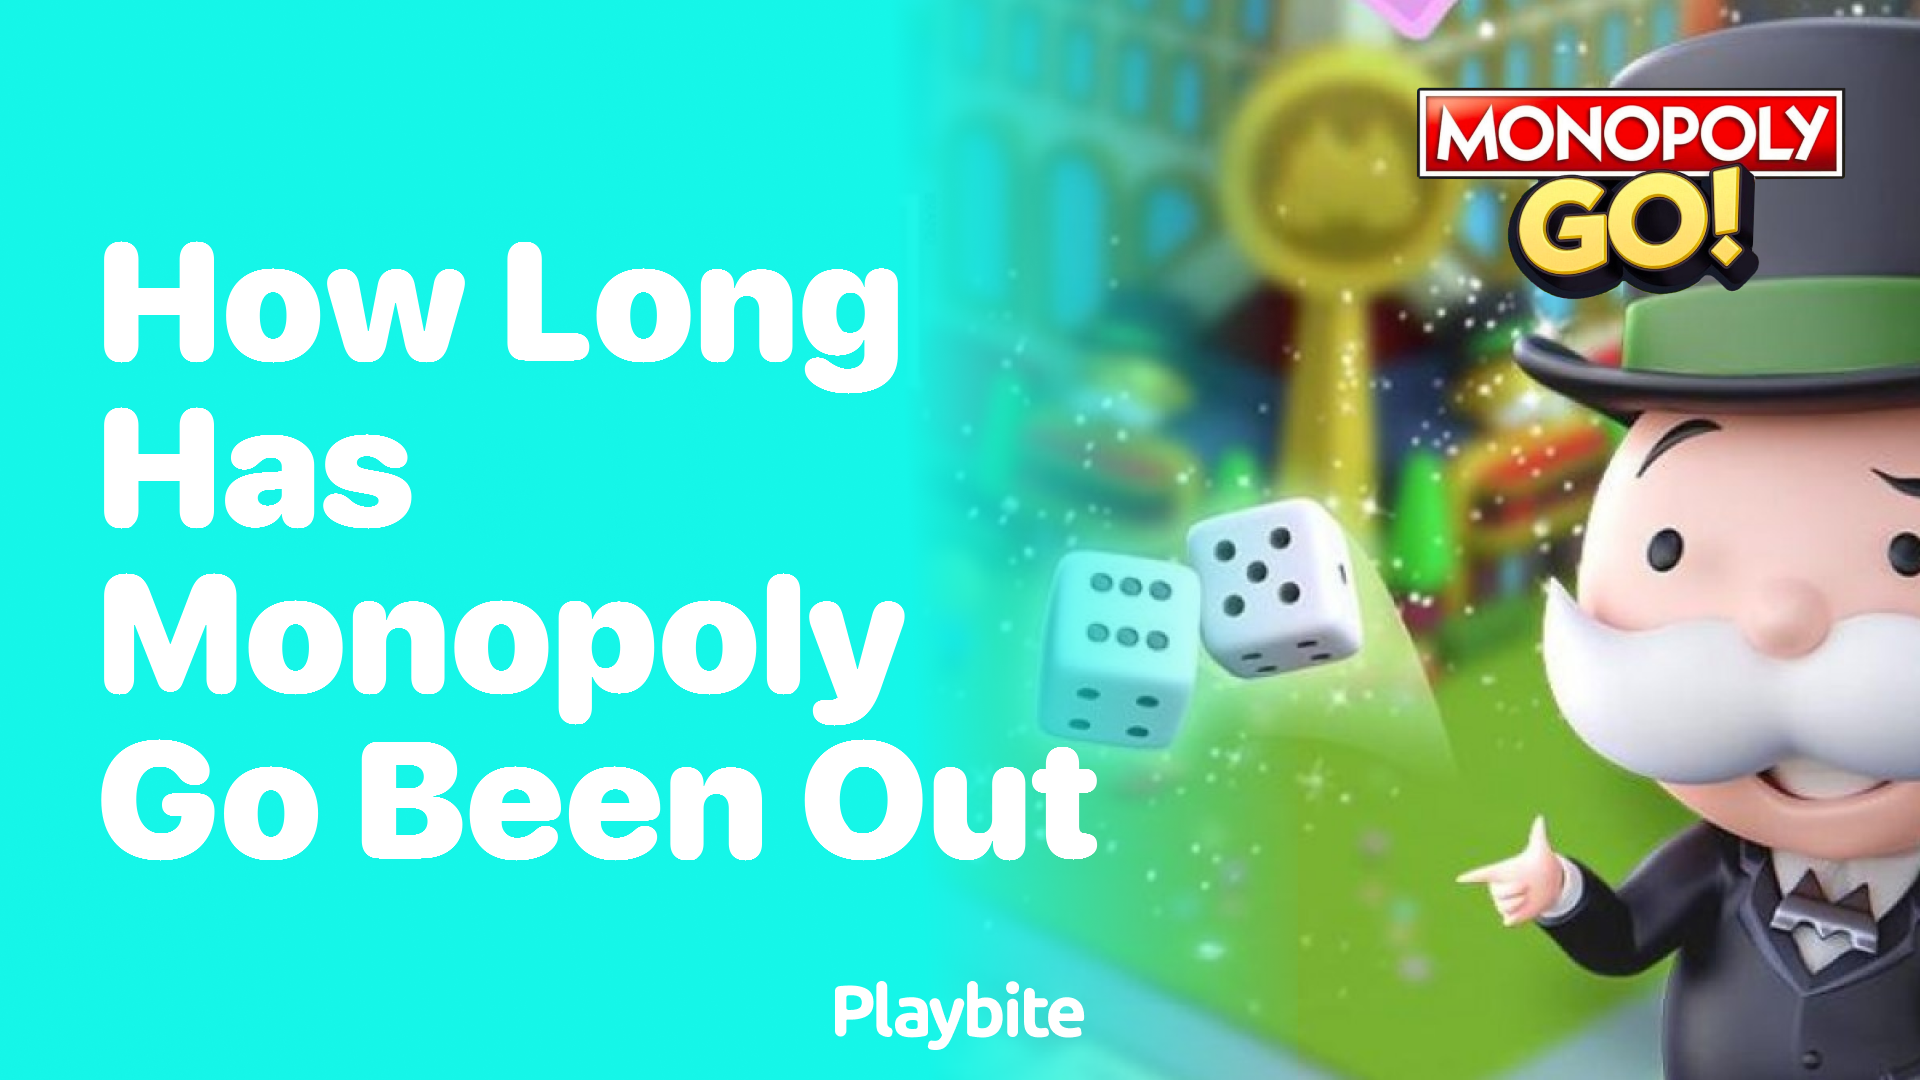 How Long Has Monopoly Go Been Available?